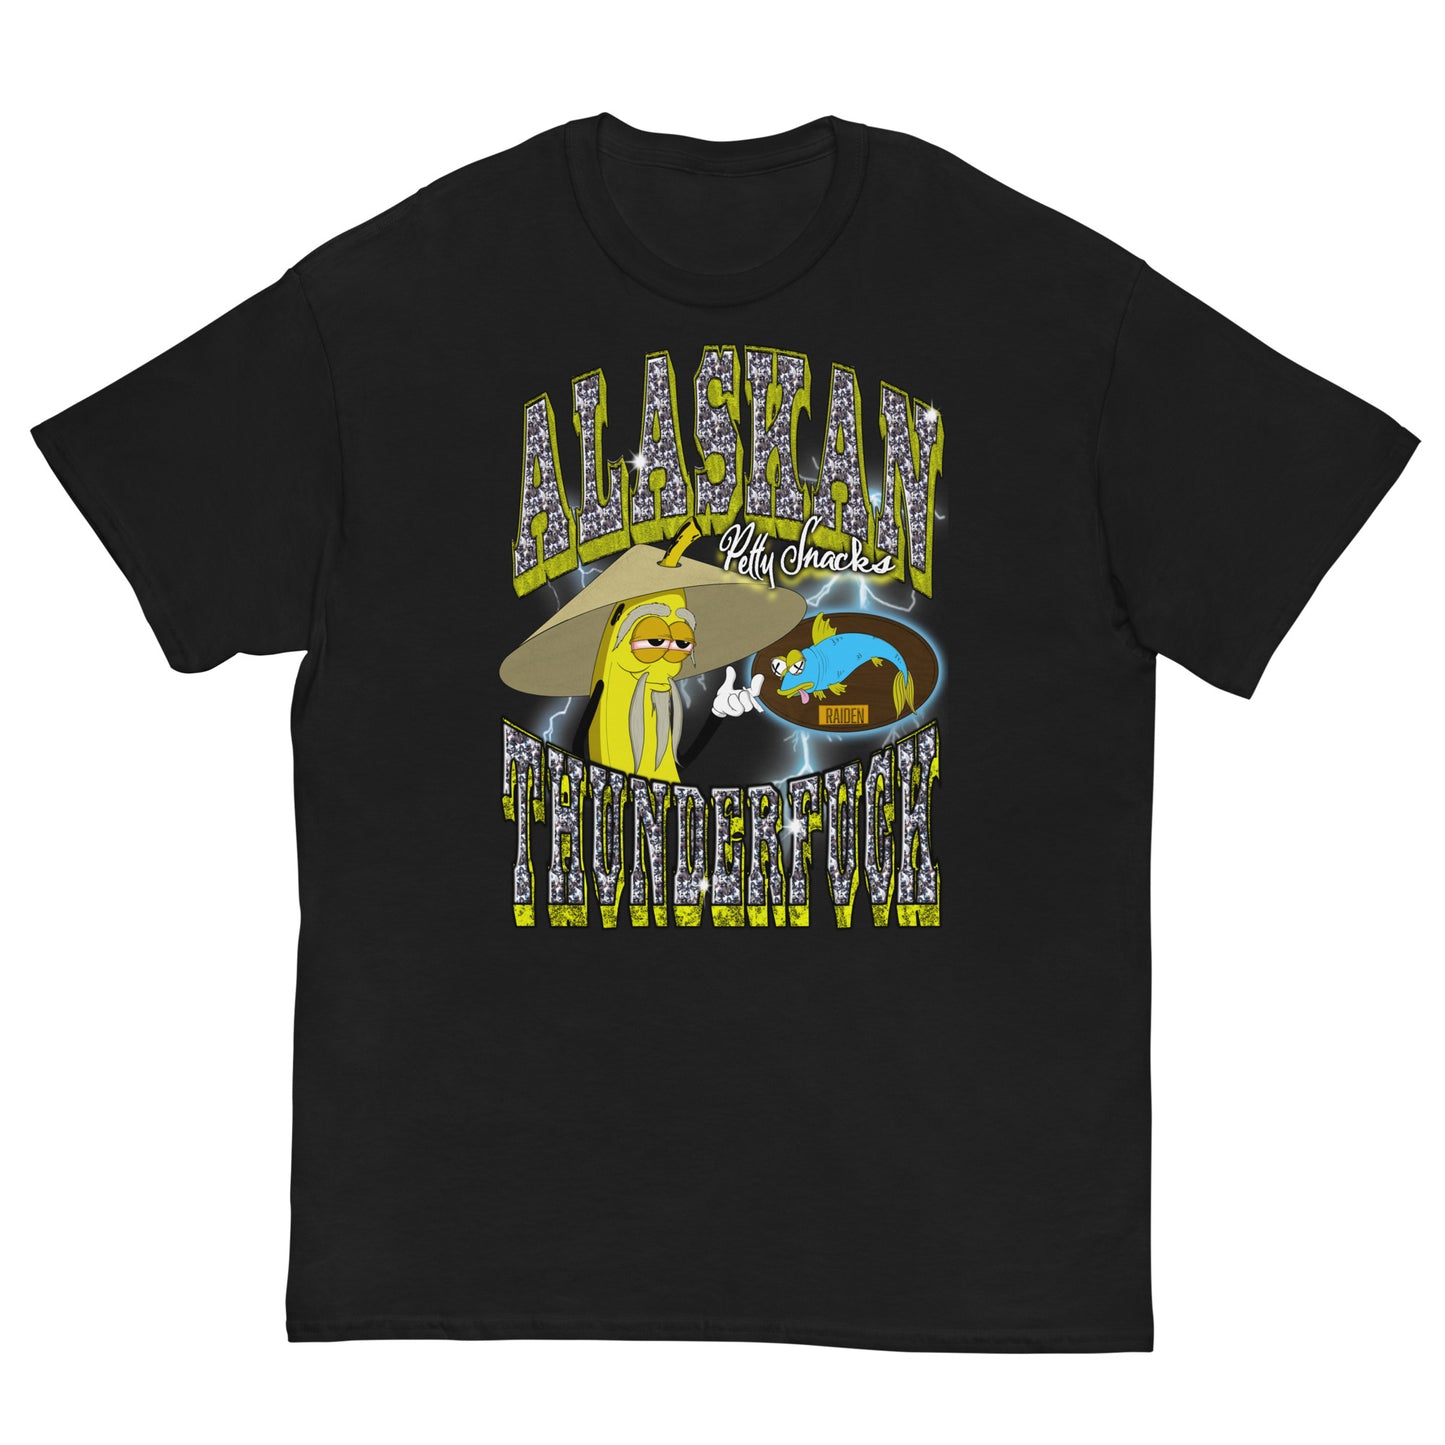 Large front graphic, black tee. Diamond style lettering with yellow accents that reads "Alaskan Thunderfuck" on top and bottom. In the middle of graphic, a wise old banana character holding a blunt wearing a bamboo hat. A wall mounted fish next to him. 